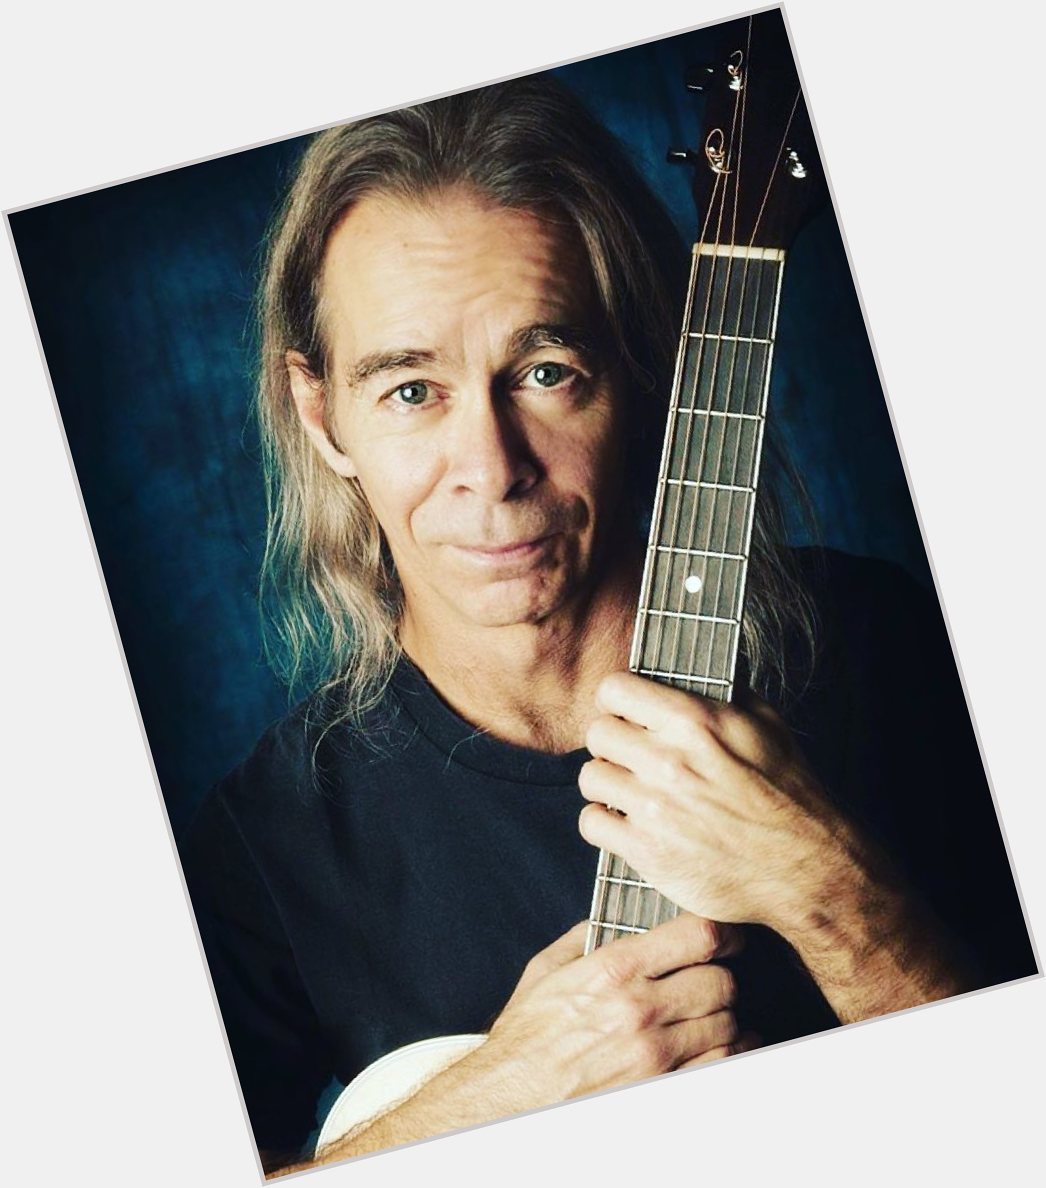  \"Please join us in wishing Tim Reynolds a very Happy Birthday! by Chris Bickford 